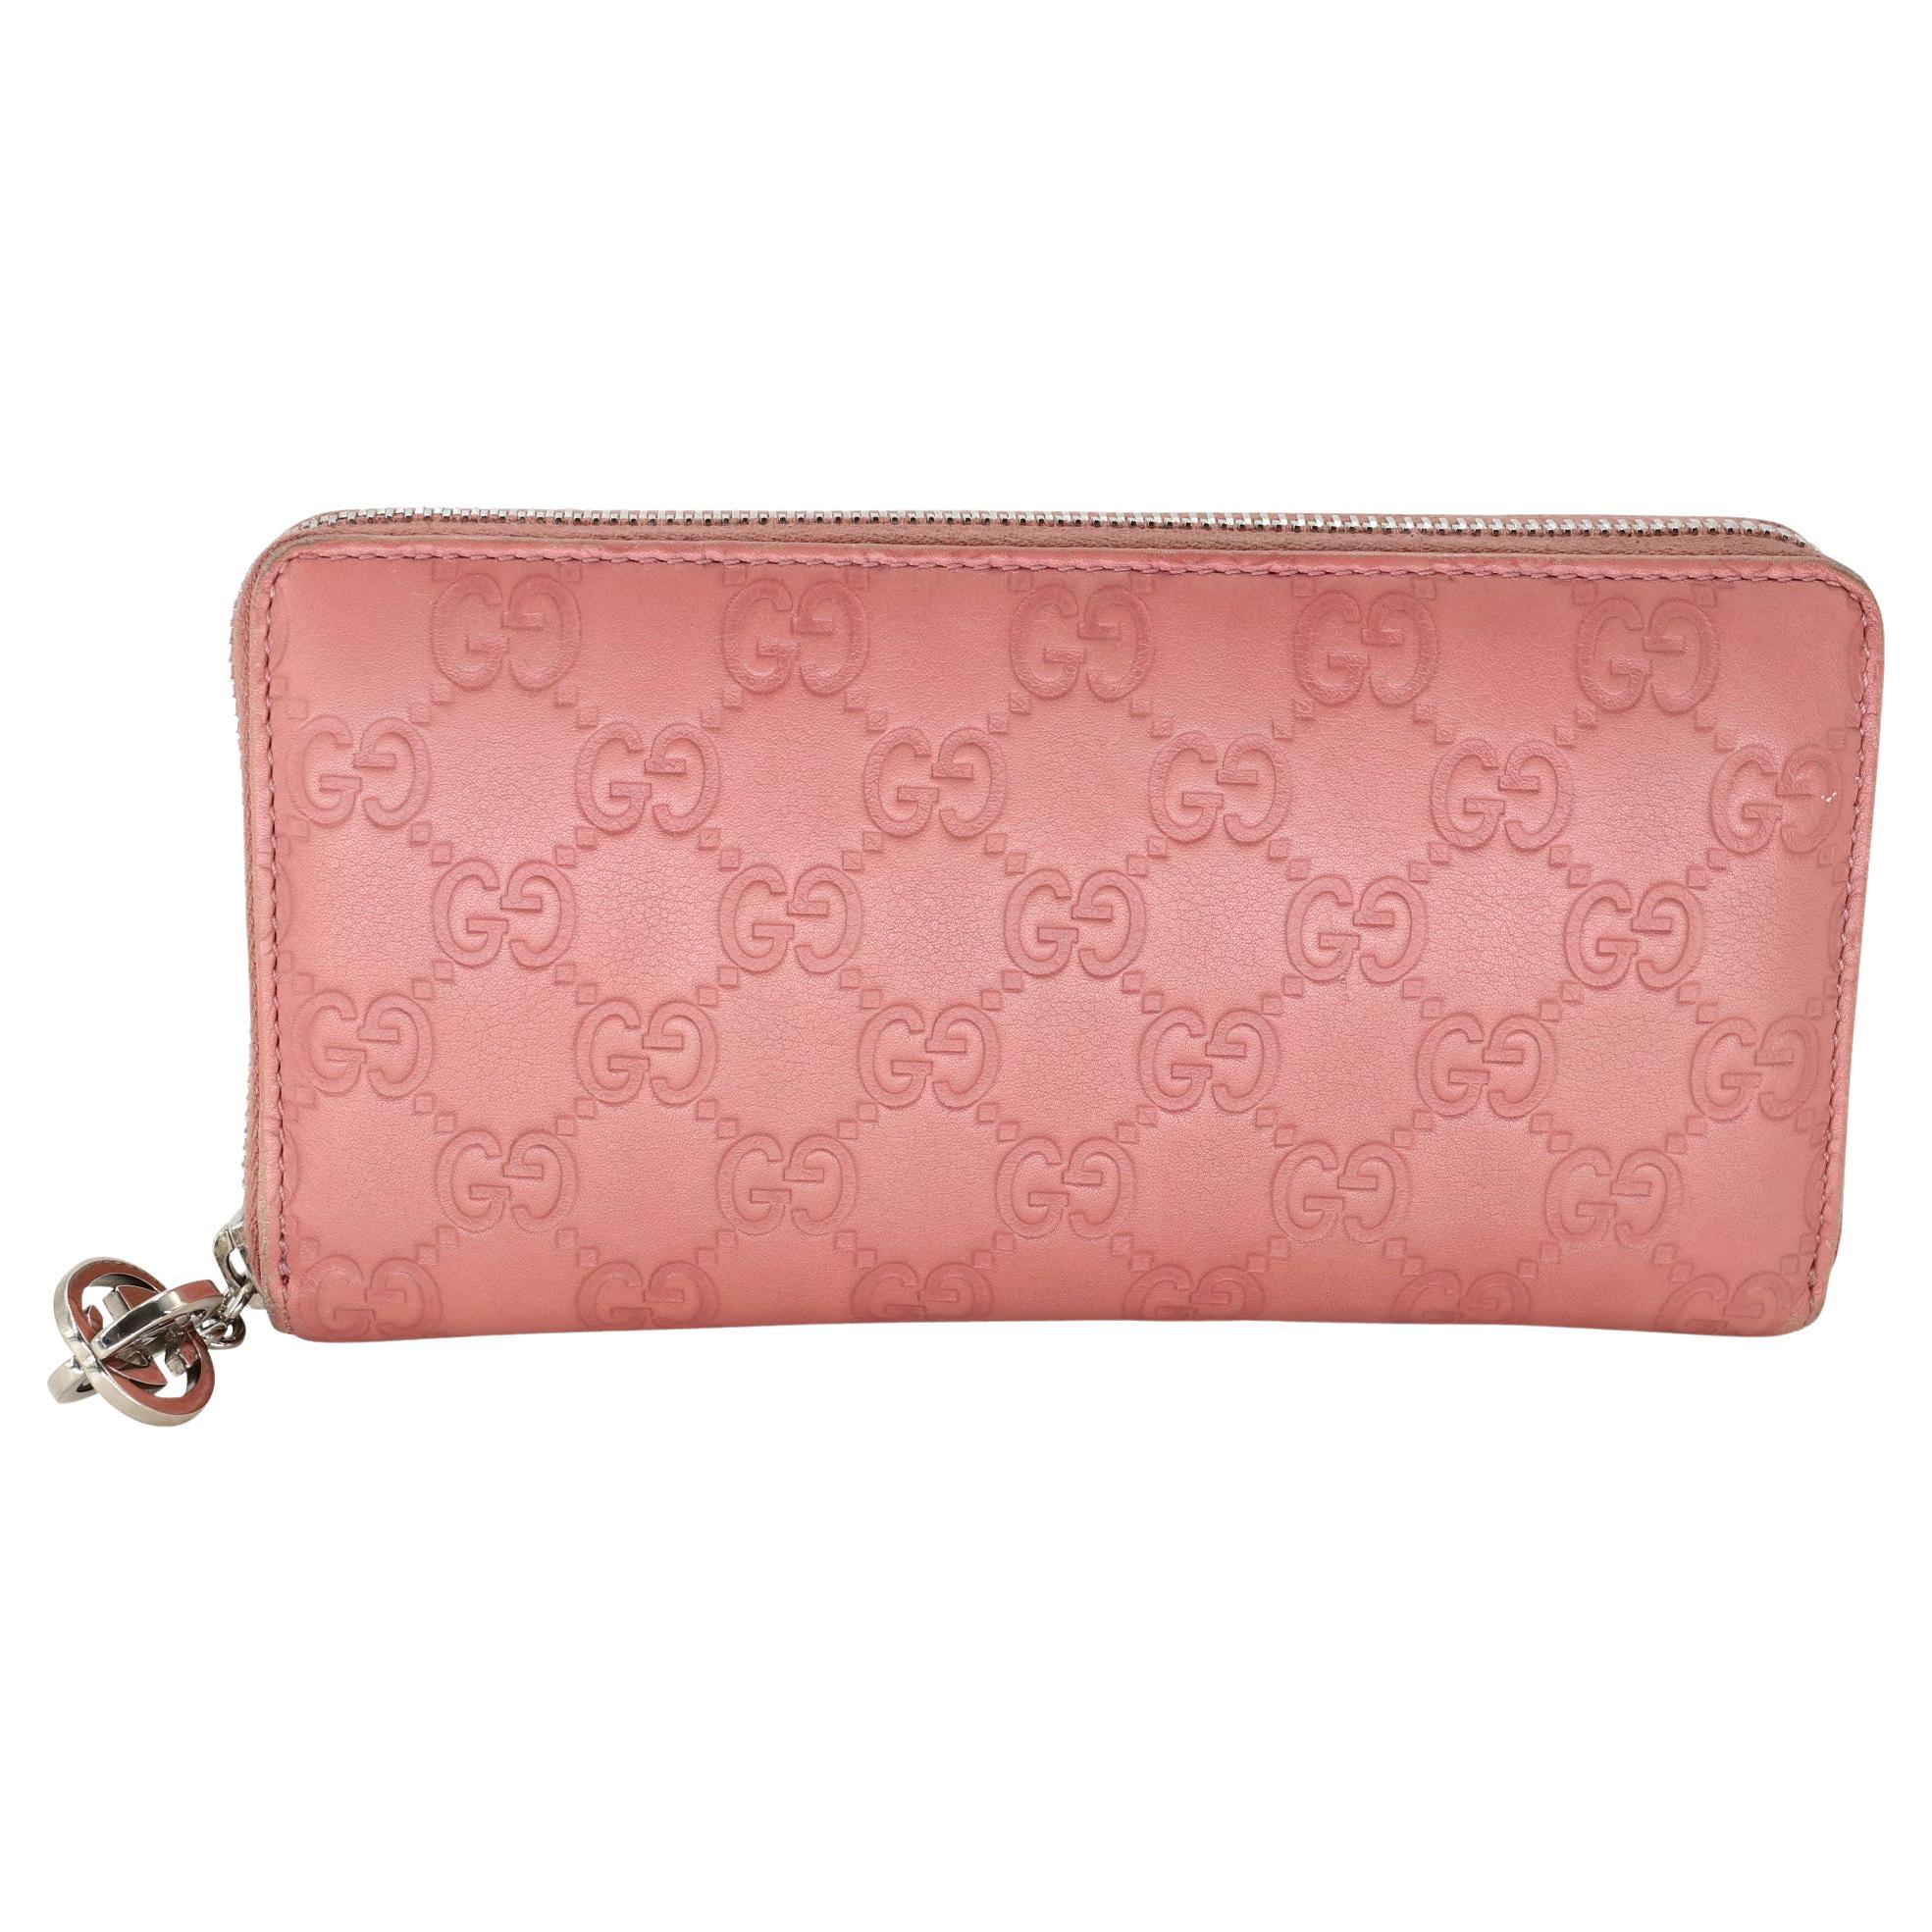 Gucci GG Guccissima Pink Leather Zip Around Wallet LV-W1110P-A003 For Sale